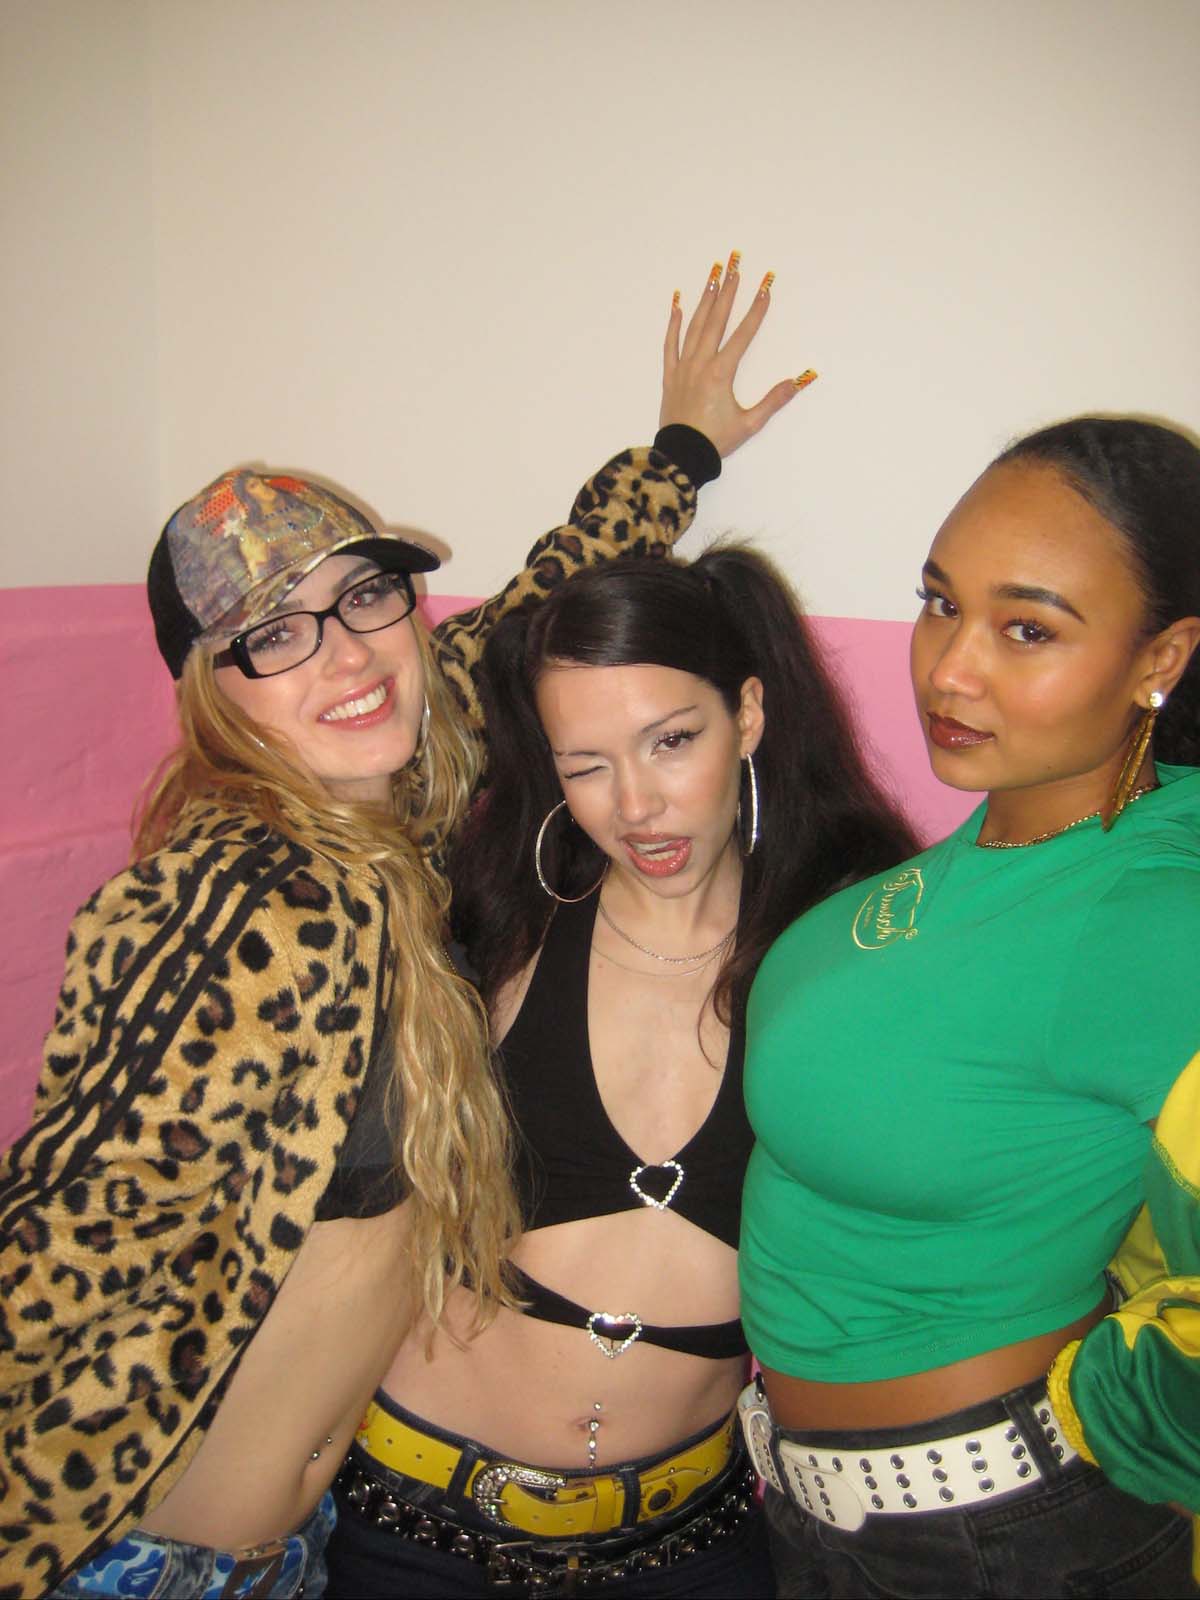 Three female rappers from the crew bangerfabrique stand close together and look into the camera. The white person on the left has long blonde hair, wears a black crop top, baseball cap, leopard tracksuit top, glasses, smiles broadly and rests her left hand on the wall with long fingernails. The one in the centre has one eye closed, wears her dark brown hair tied into two plaits, large silver hoop earrings and a black crop top. The black person on the right has her black hair tied back tightly and is wearing a green T-shirt. They are all wearing trousers and wide 90s-style belts.